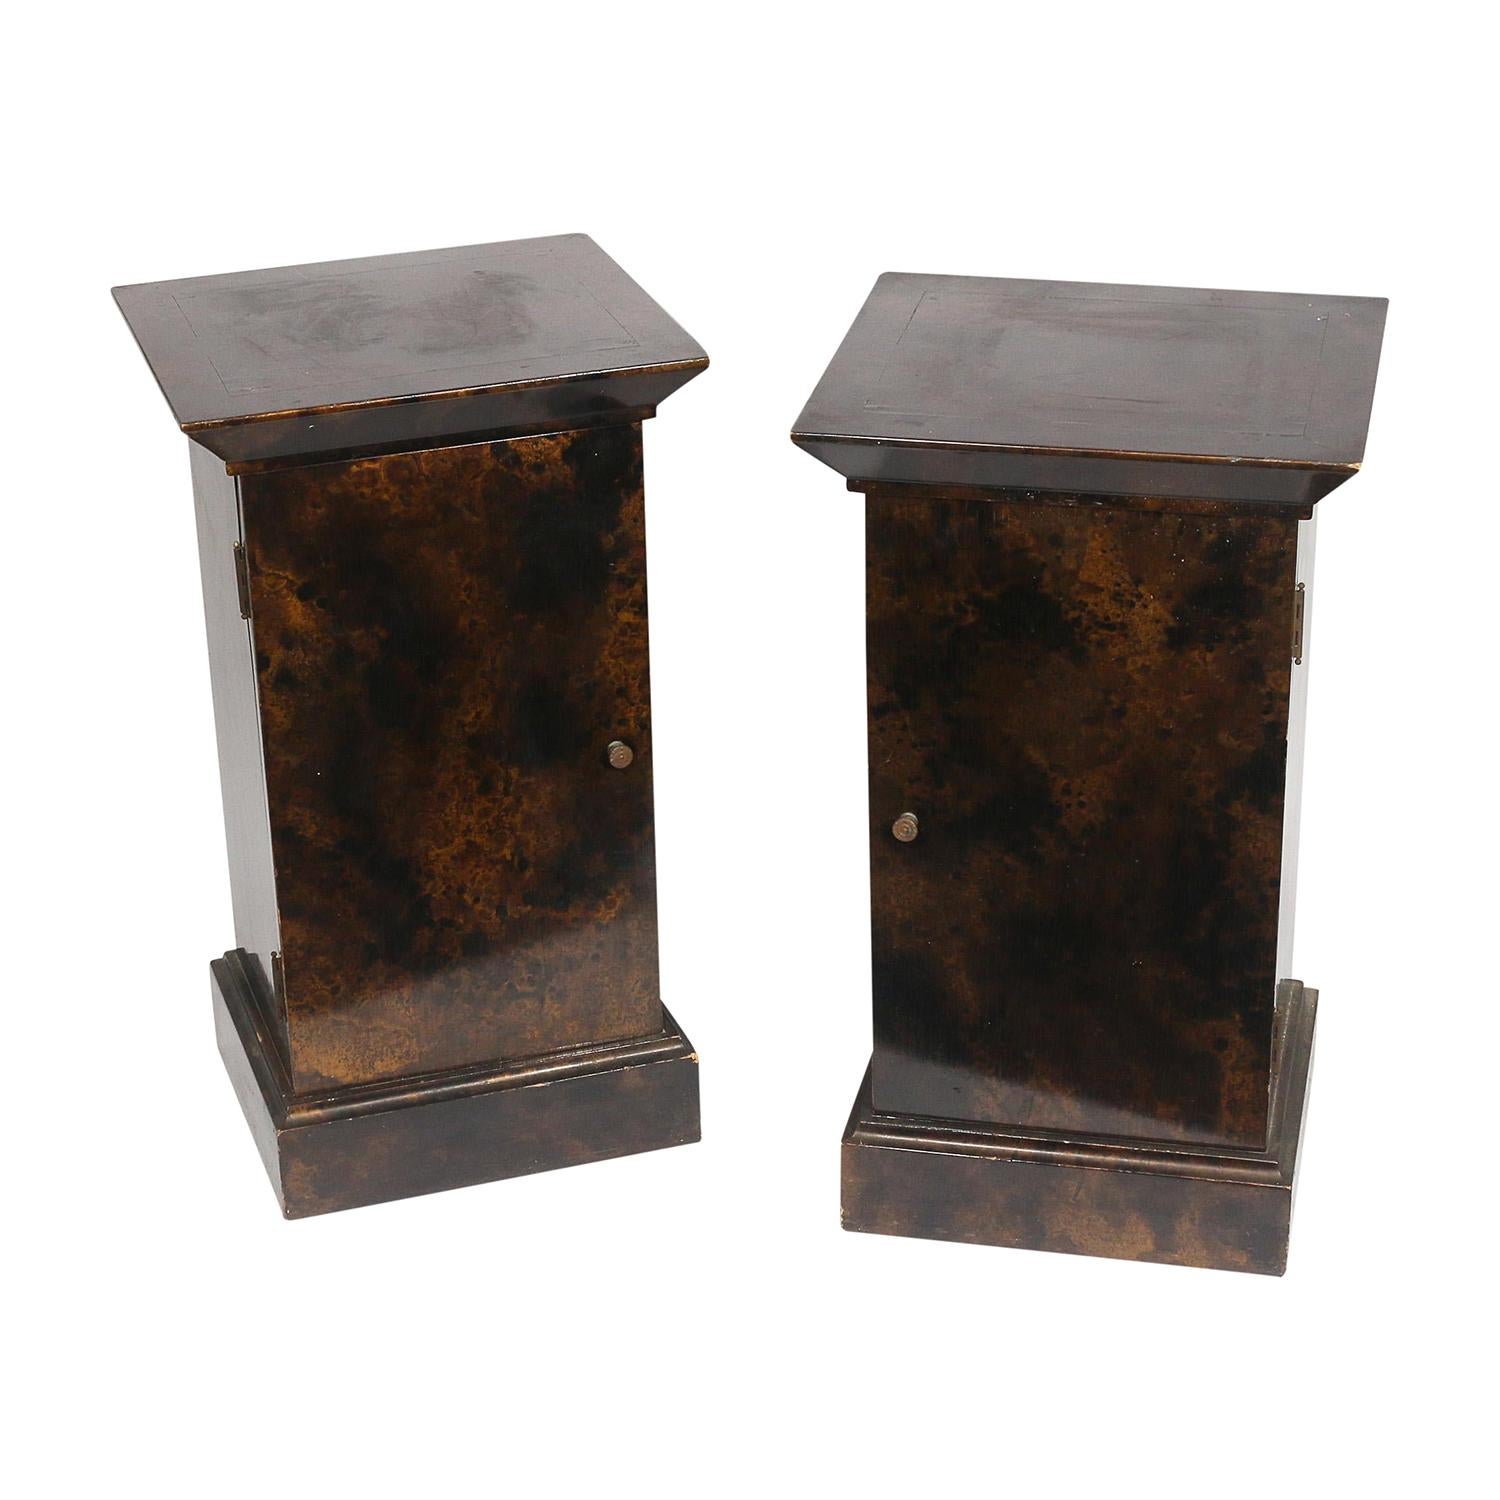 A vintage Mid-Century Modern American pair of cabinets made of hand carved lacquered burl wood, in good condition. The small, smokey bedside tables are composed with a single cabinet door, enhanced by unique wood carvings. Wear consistent with age